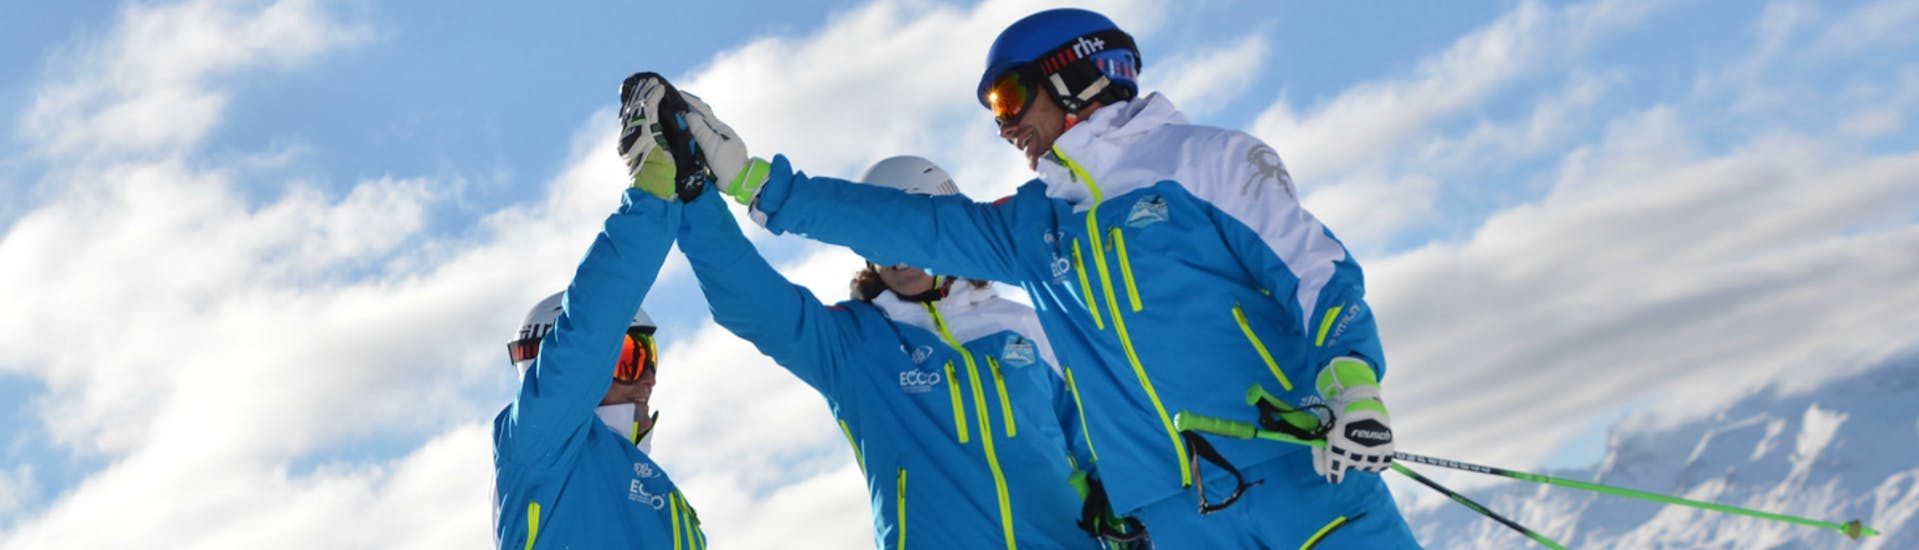 Three ski instructors from the Silvaplana Top Snowsports ski school give each other a high-five during the kids ski lessons for advanced skiers..